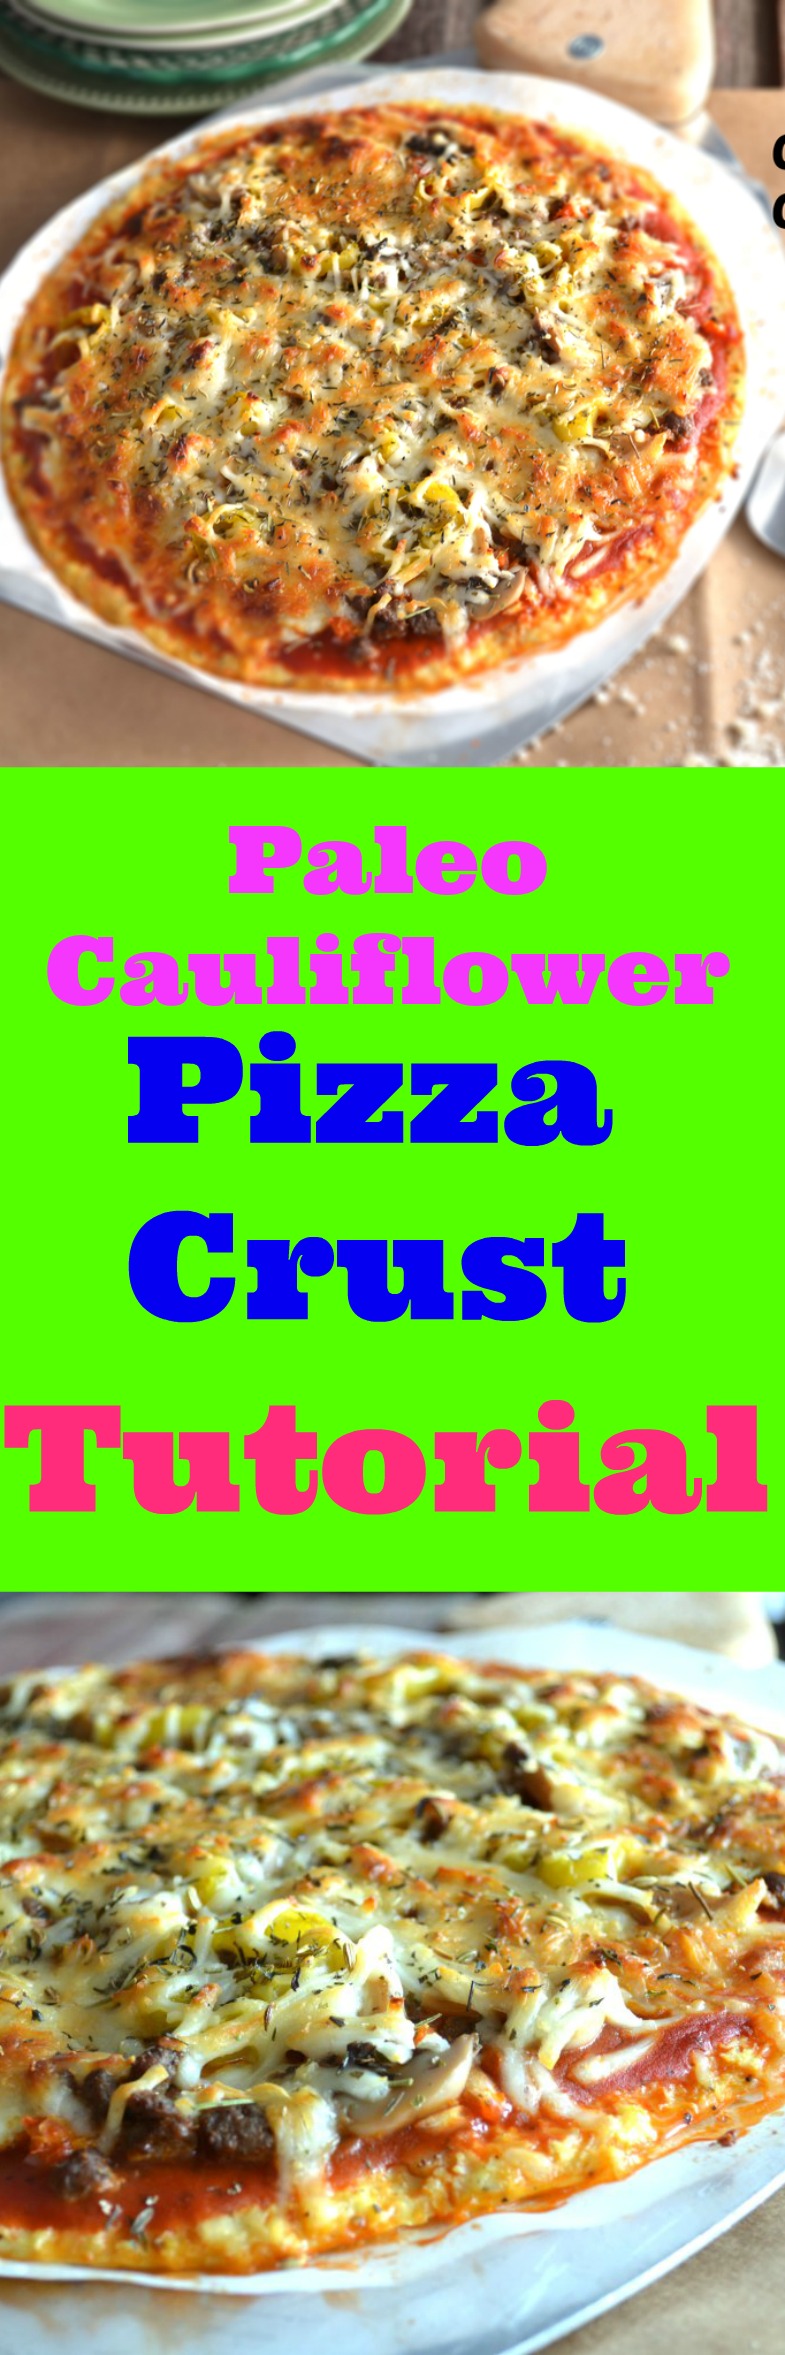 How to make Paleo Cauliflower Crust Pizza Recipe. That will help you with your Gluten-Free diet. This pizza crust is actually very simple to make, follow our tutorial! This healthy recipe is easy and low carb. The crust is crispy and can be made with no food processor.